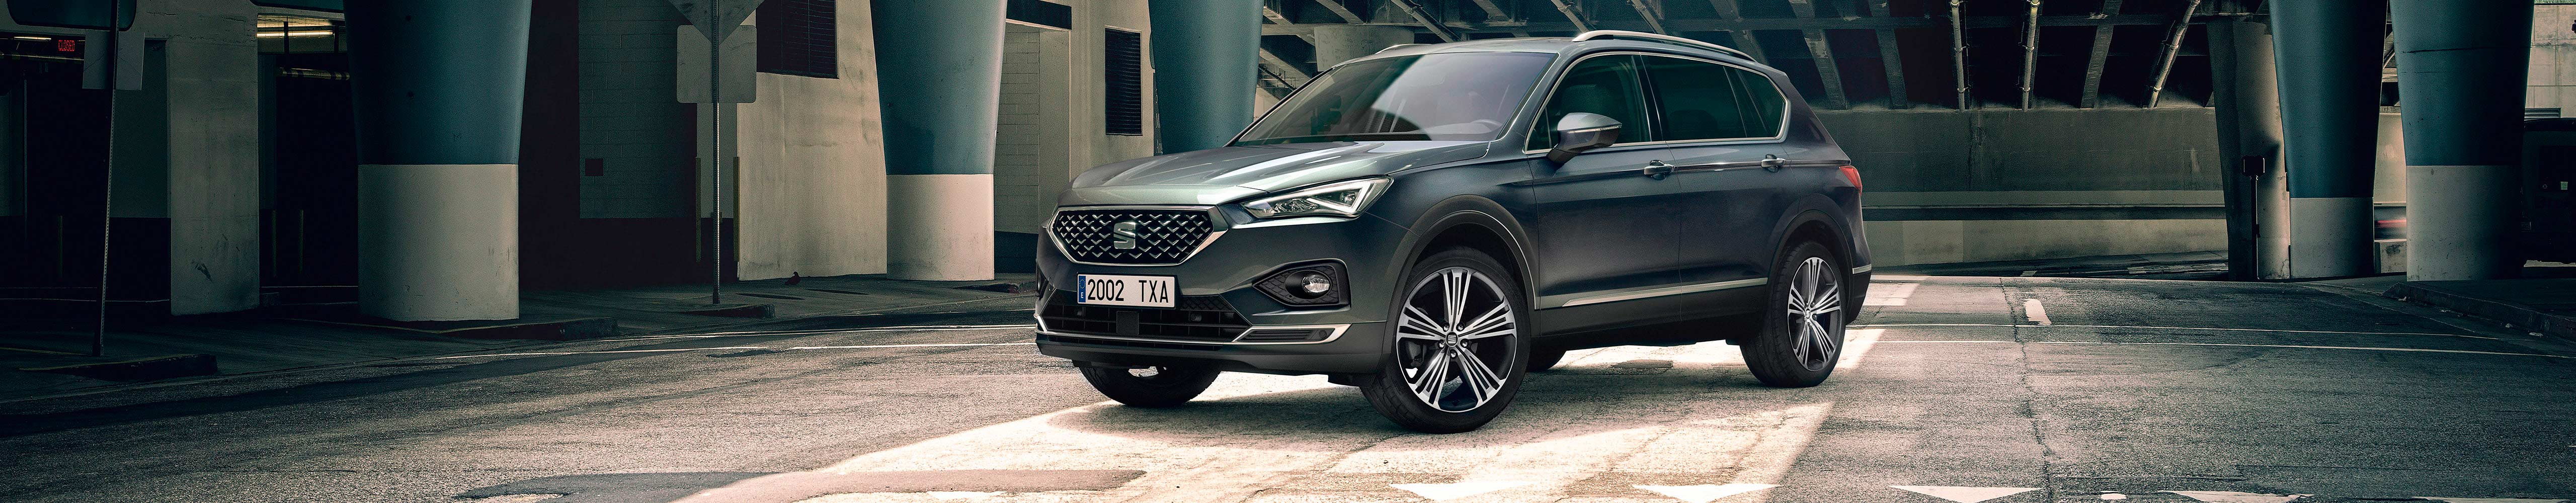 New SEAT Tarraco SUV 7 seater parked outside building beauty shot